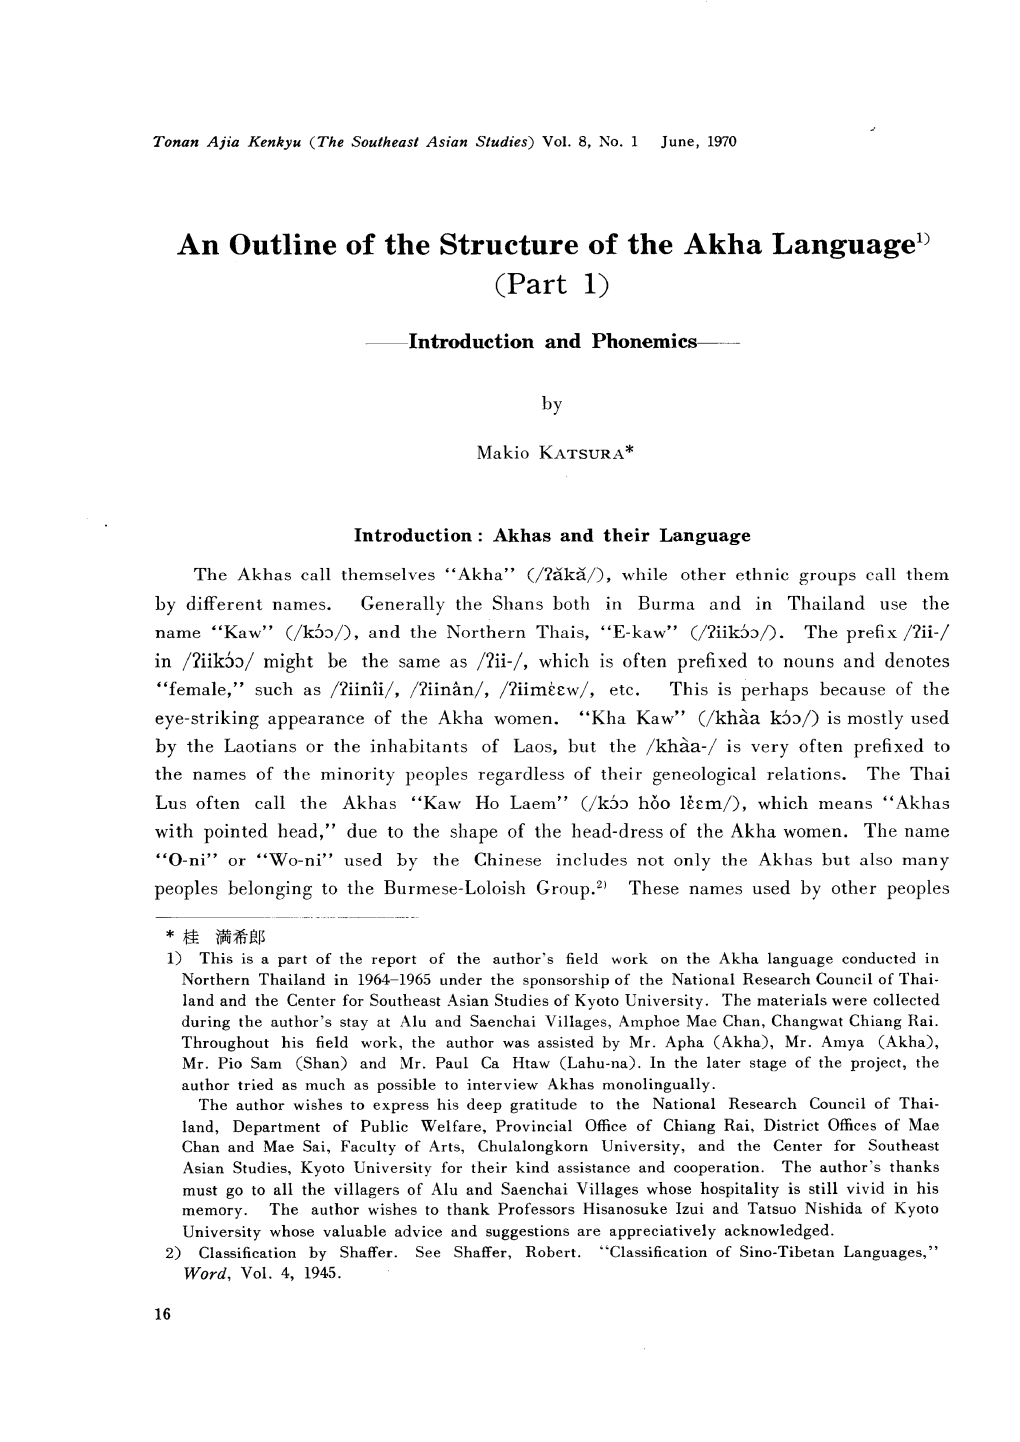 An Outline of the Structure of the Akha Language1 (Part 1)